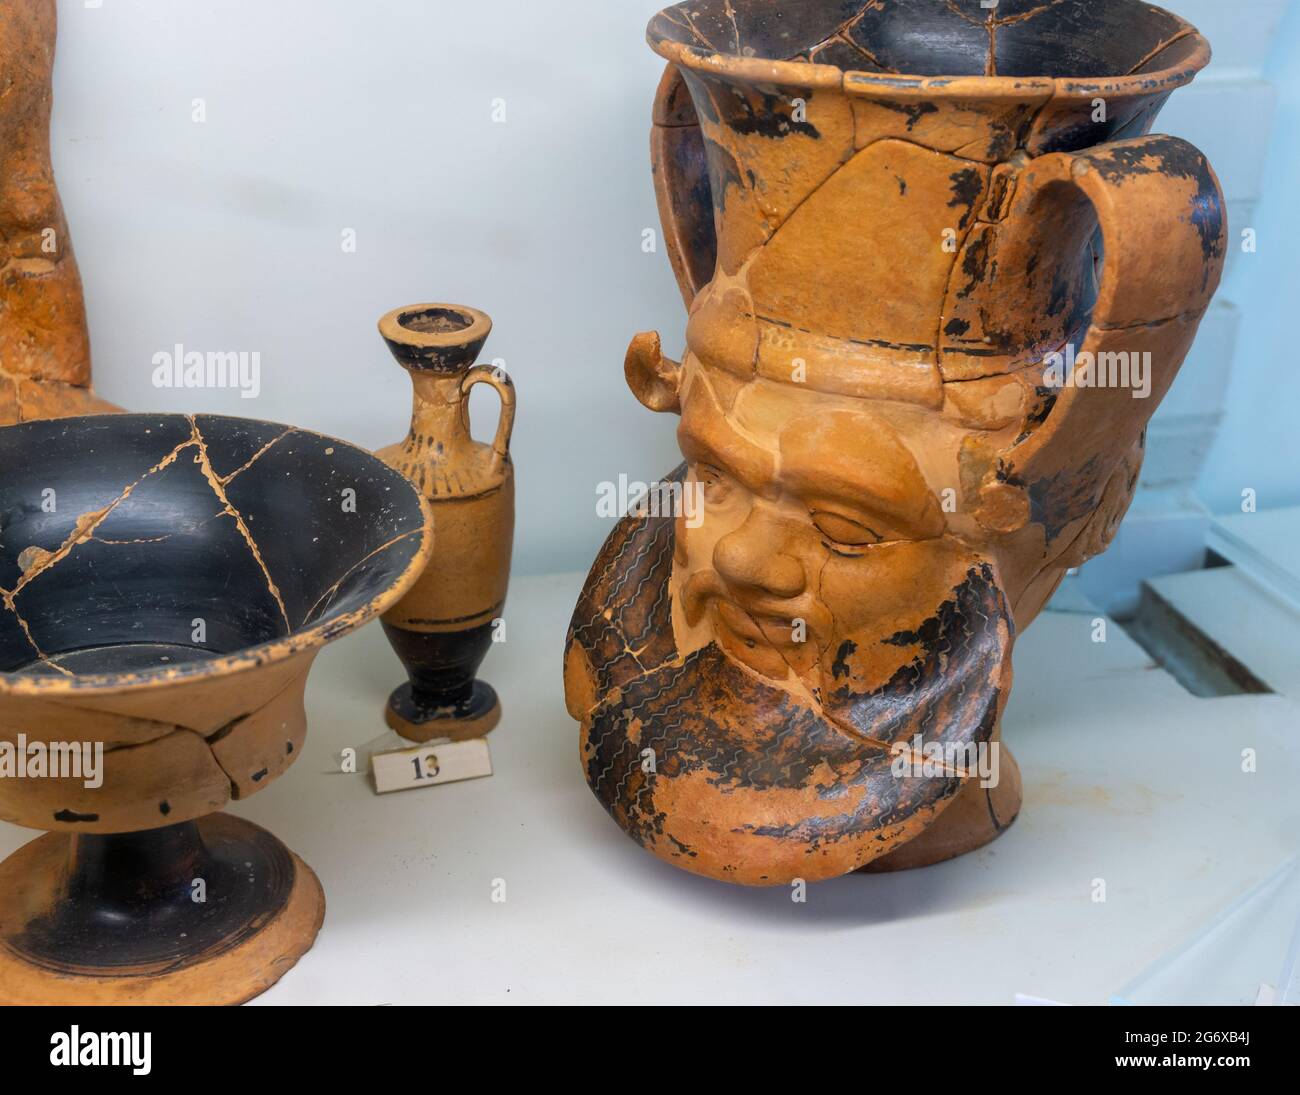 SANTA MARINELLA, ROME, ITALY - March 25, 2020: Collection of ancient Etruscan vases with a cup for wine with human face (6th century BC) Stock Photo